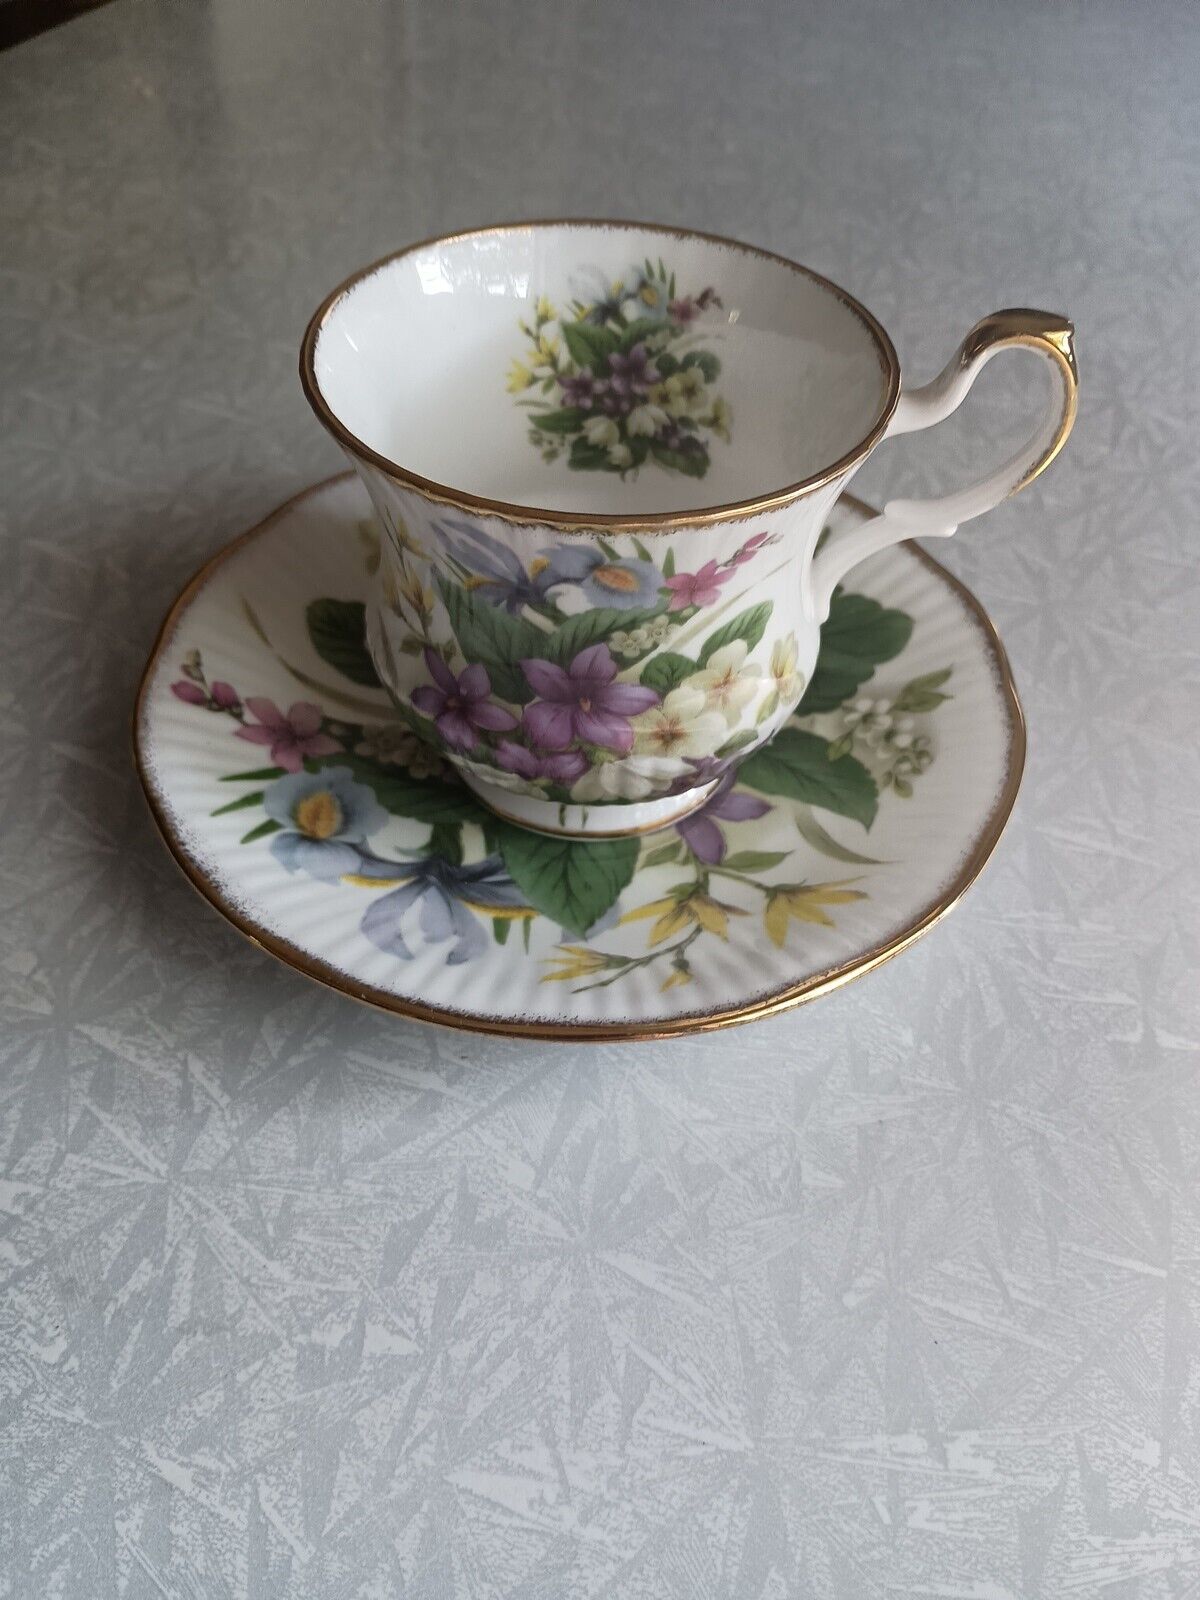 Queens Pedestal Tea Cup And Saucer - Wild Flowers - Made in England 